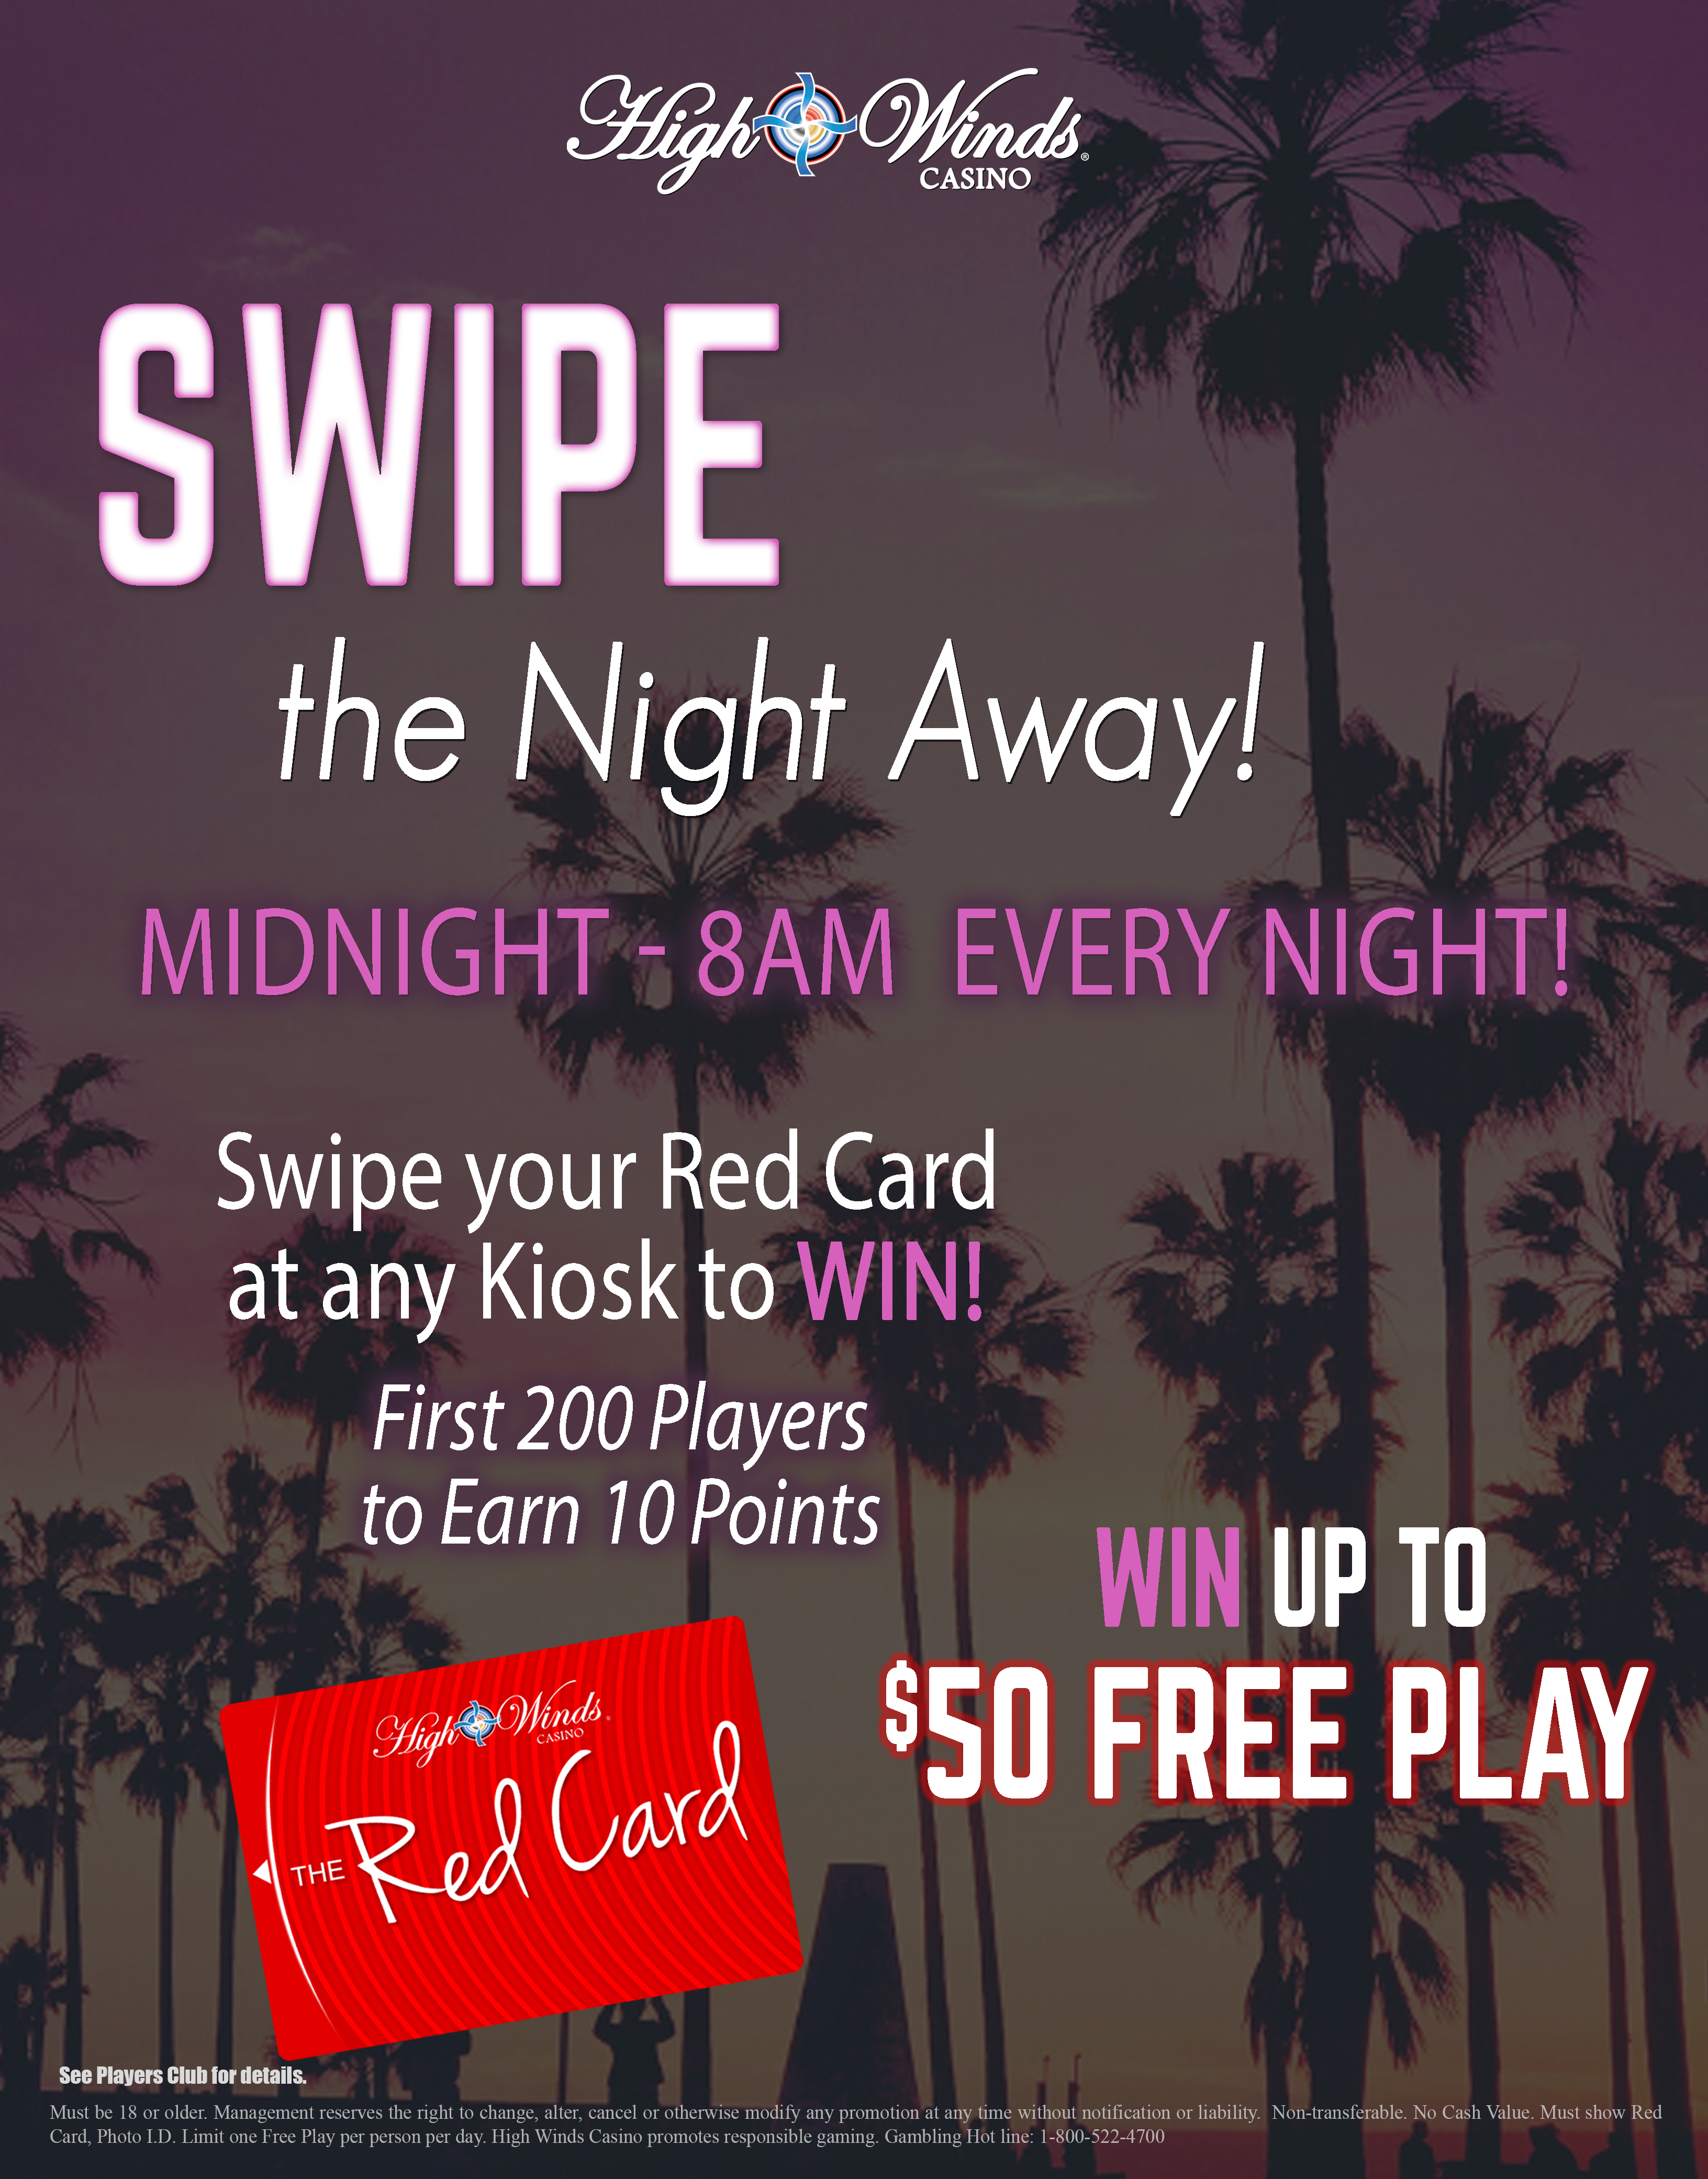 Swipe the Night Away EVERY NIGHT from 12 am - 8 am for your chance to win up to $50 Free Play!! The 1st 200 players from 2 am to 6 am every night, that earn 10 points are eligible to play! Each player after earning their points may swipe their High Winds Casino Red Card at our kiosk to claim their free play prize of amounts up to $50!